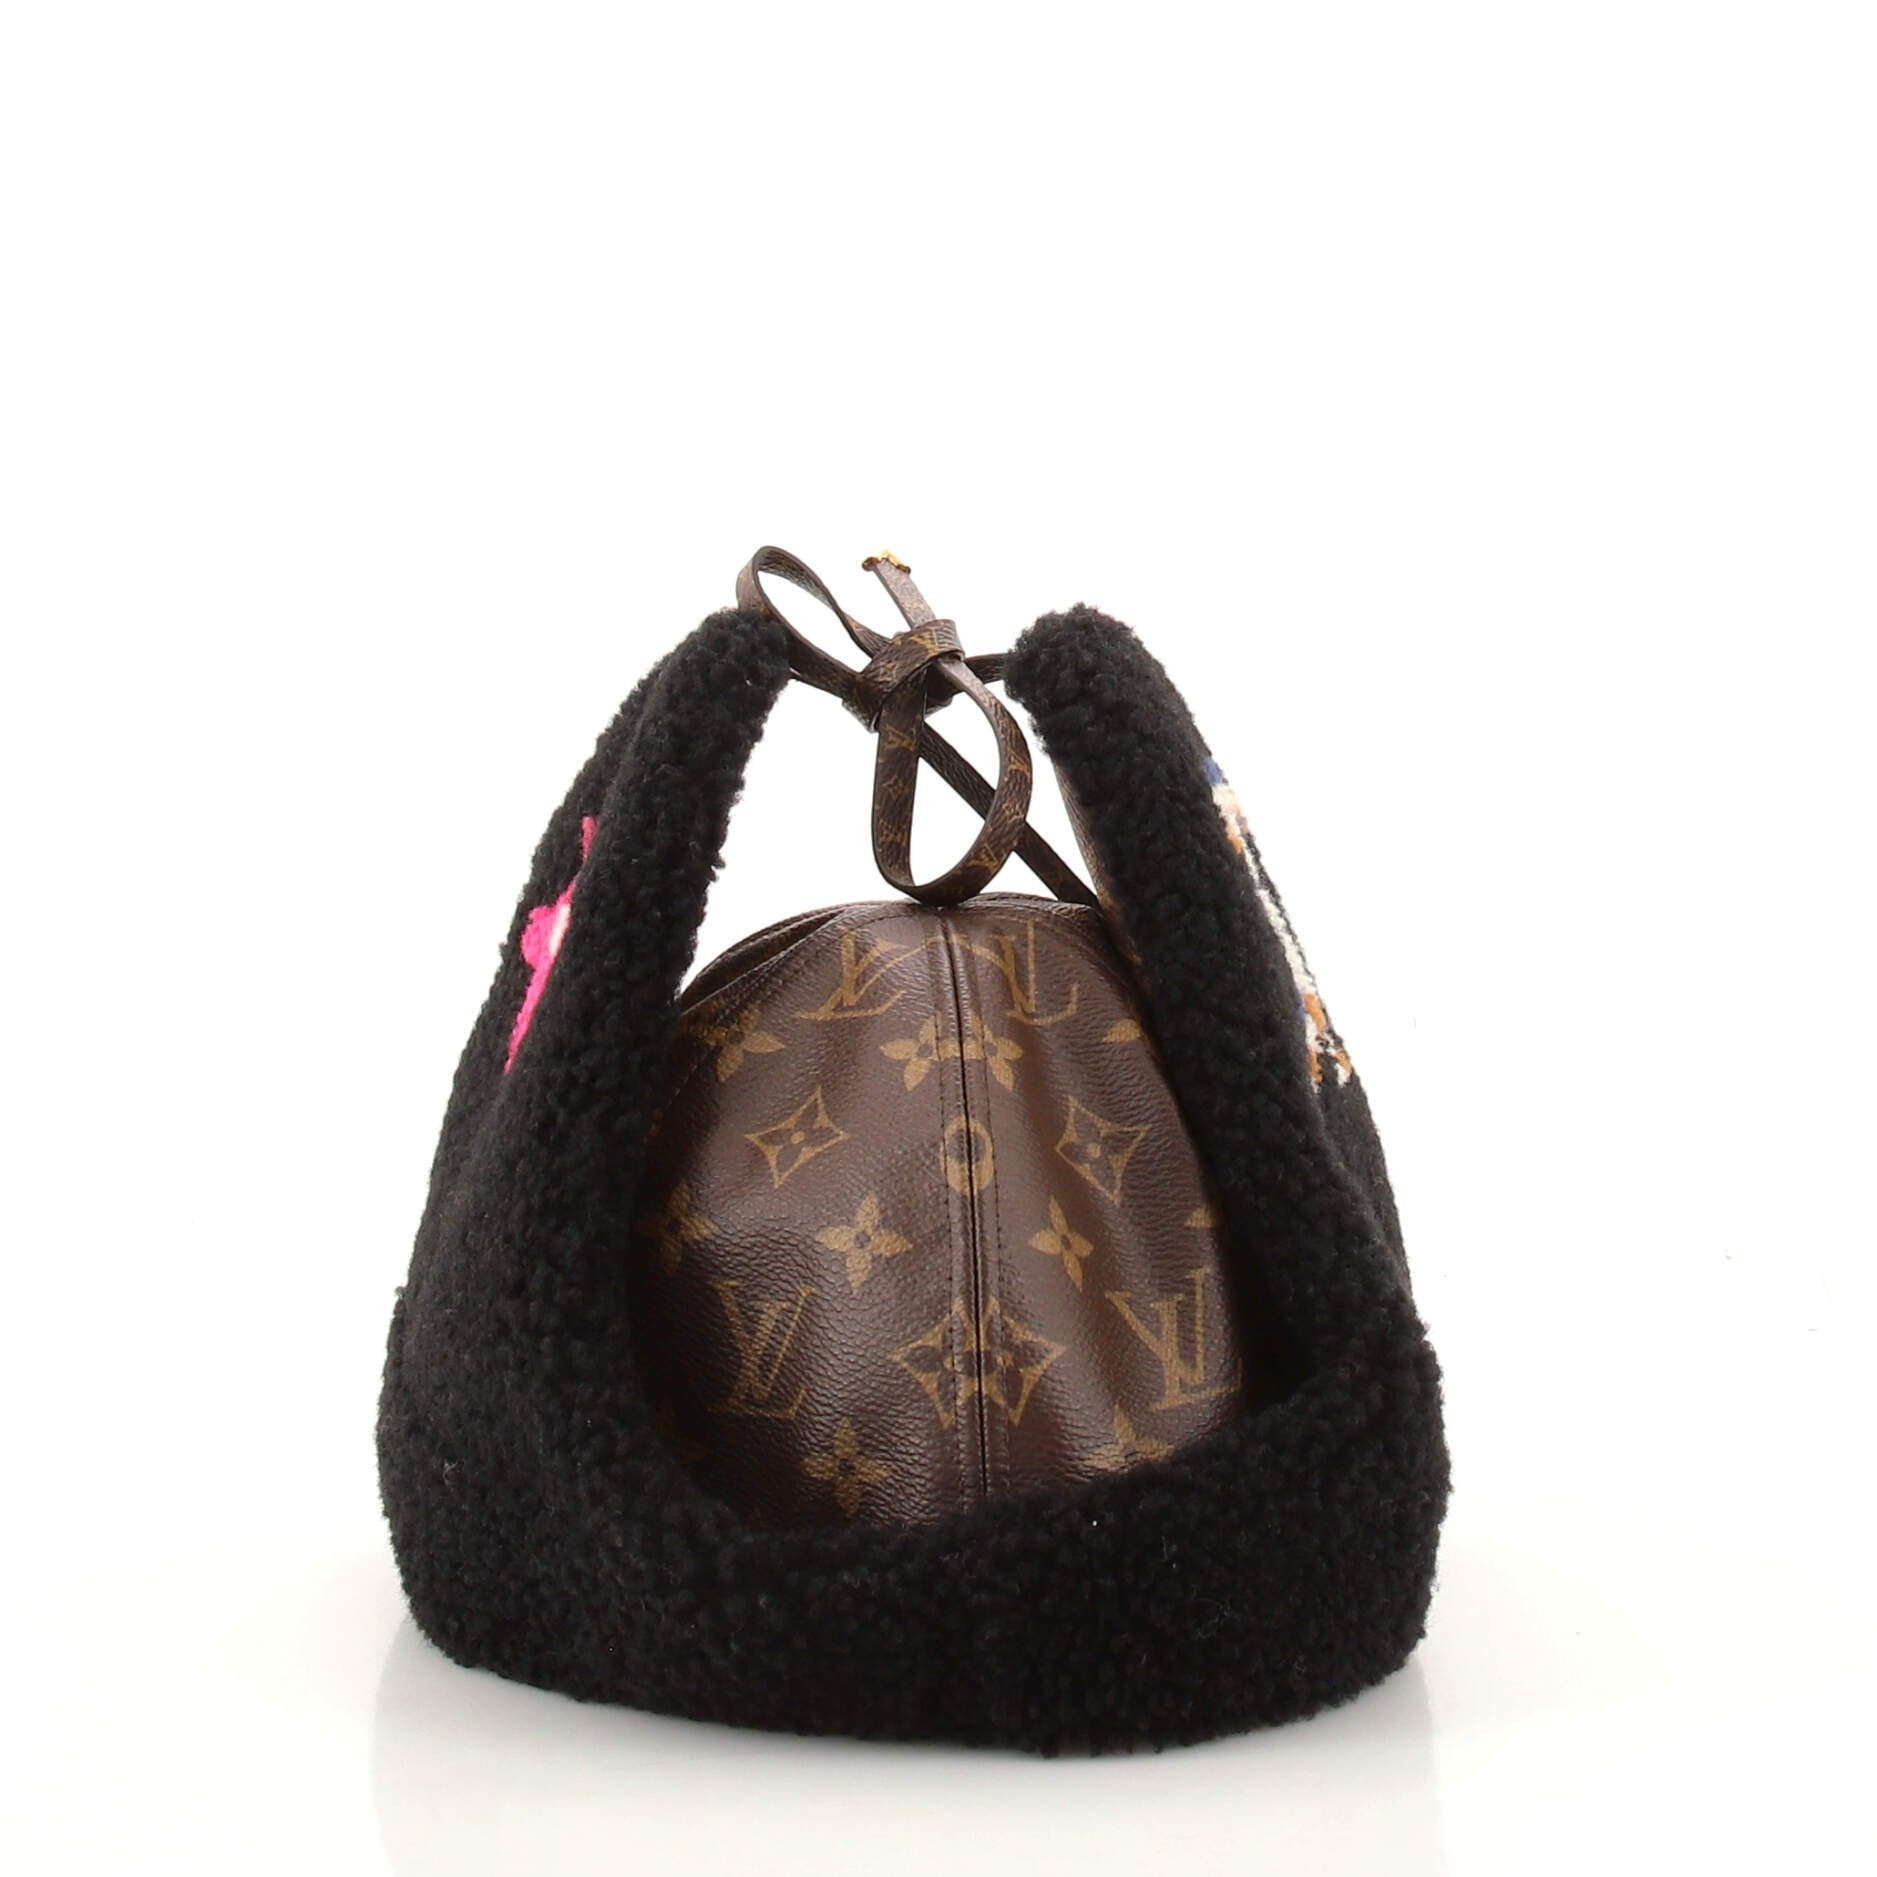 Products By Louis Vuitton: Teddy Chapkalaska Hat